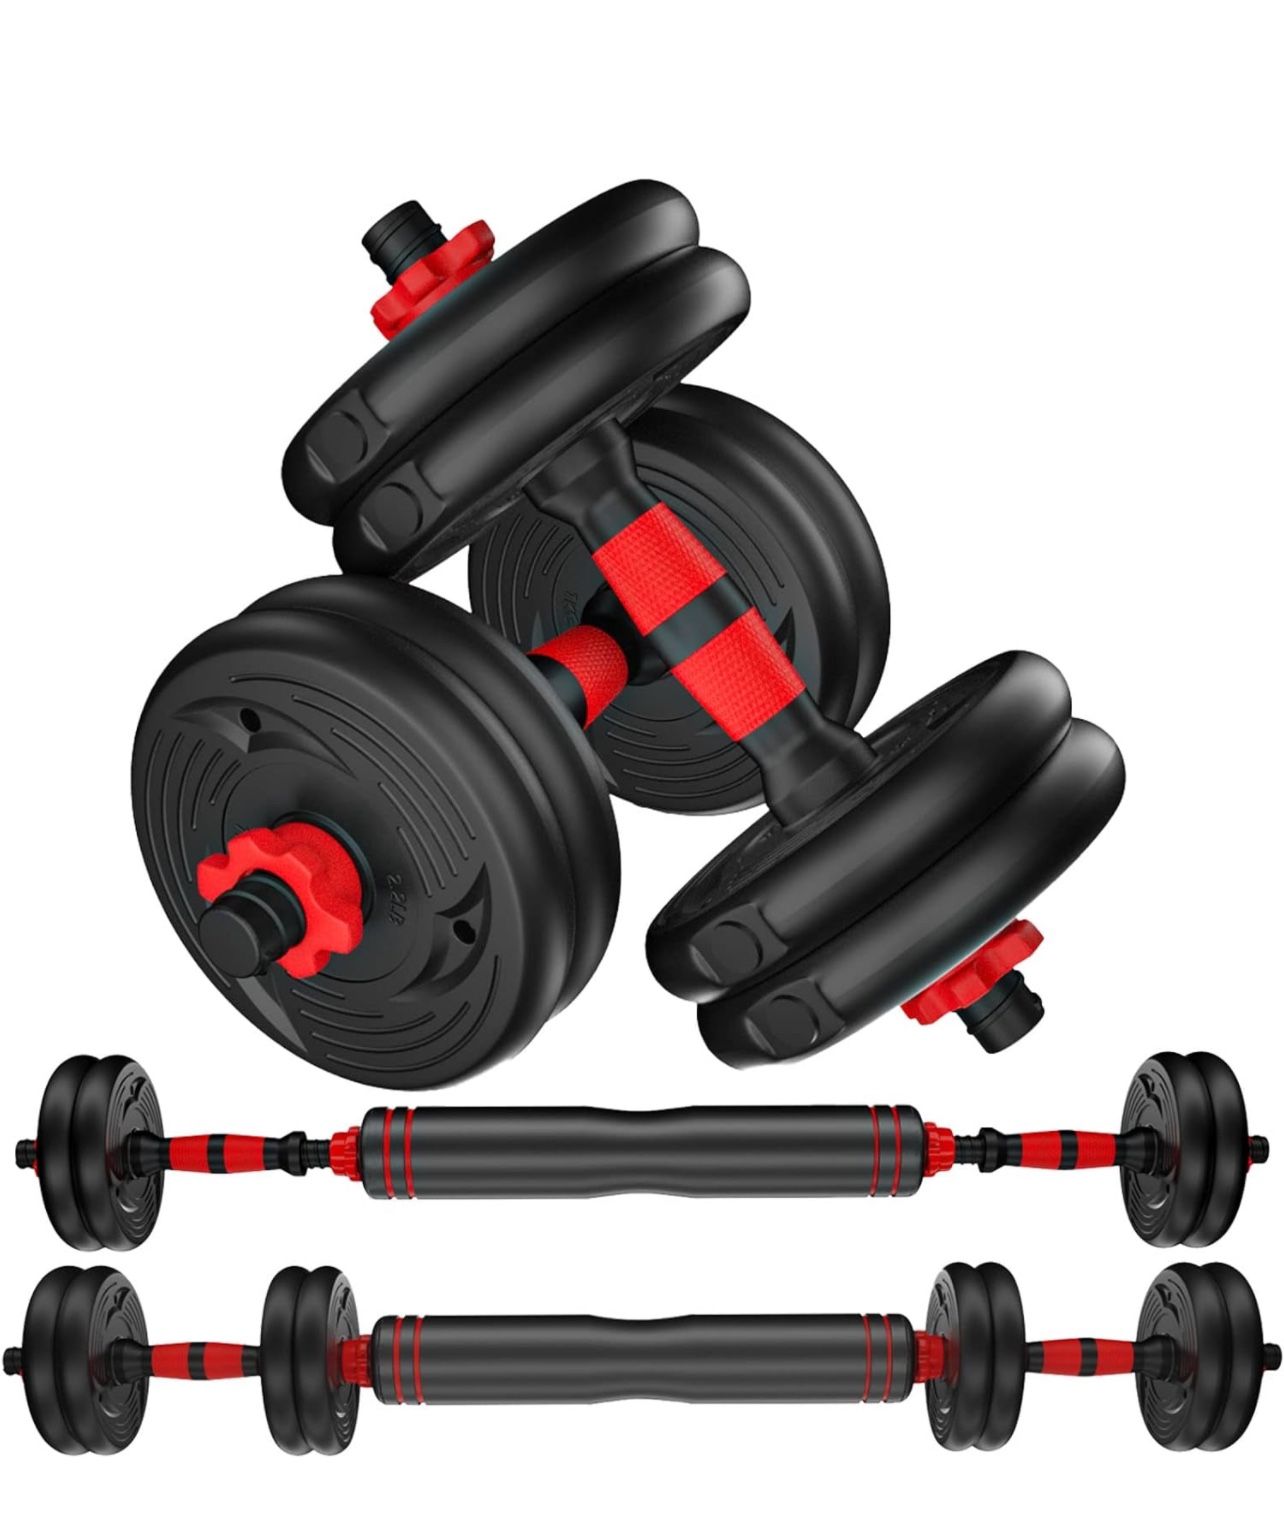 CANMALCHI Adjustable Dumbbells Weights Set 20lbs/33lbs/44lbs for Indoor Workout